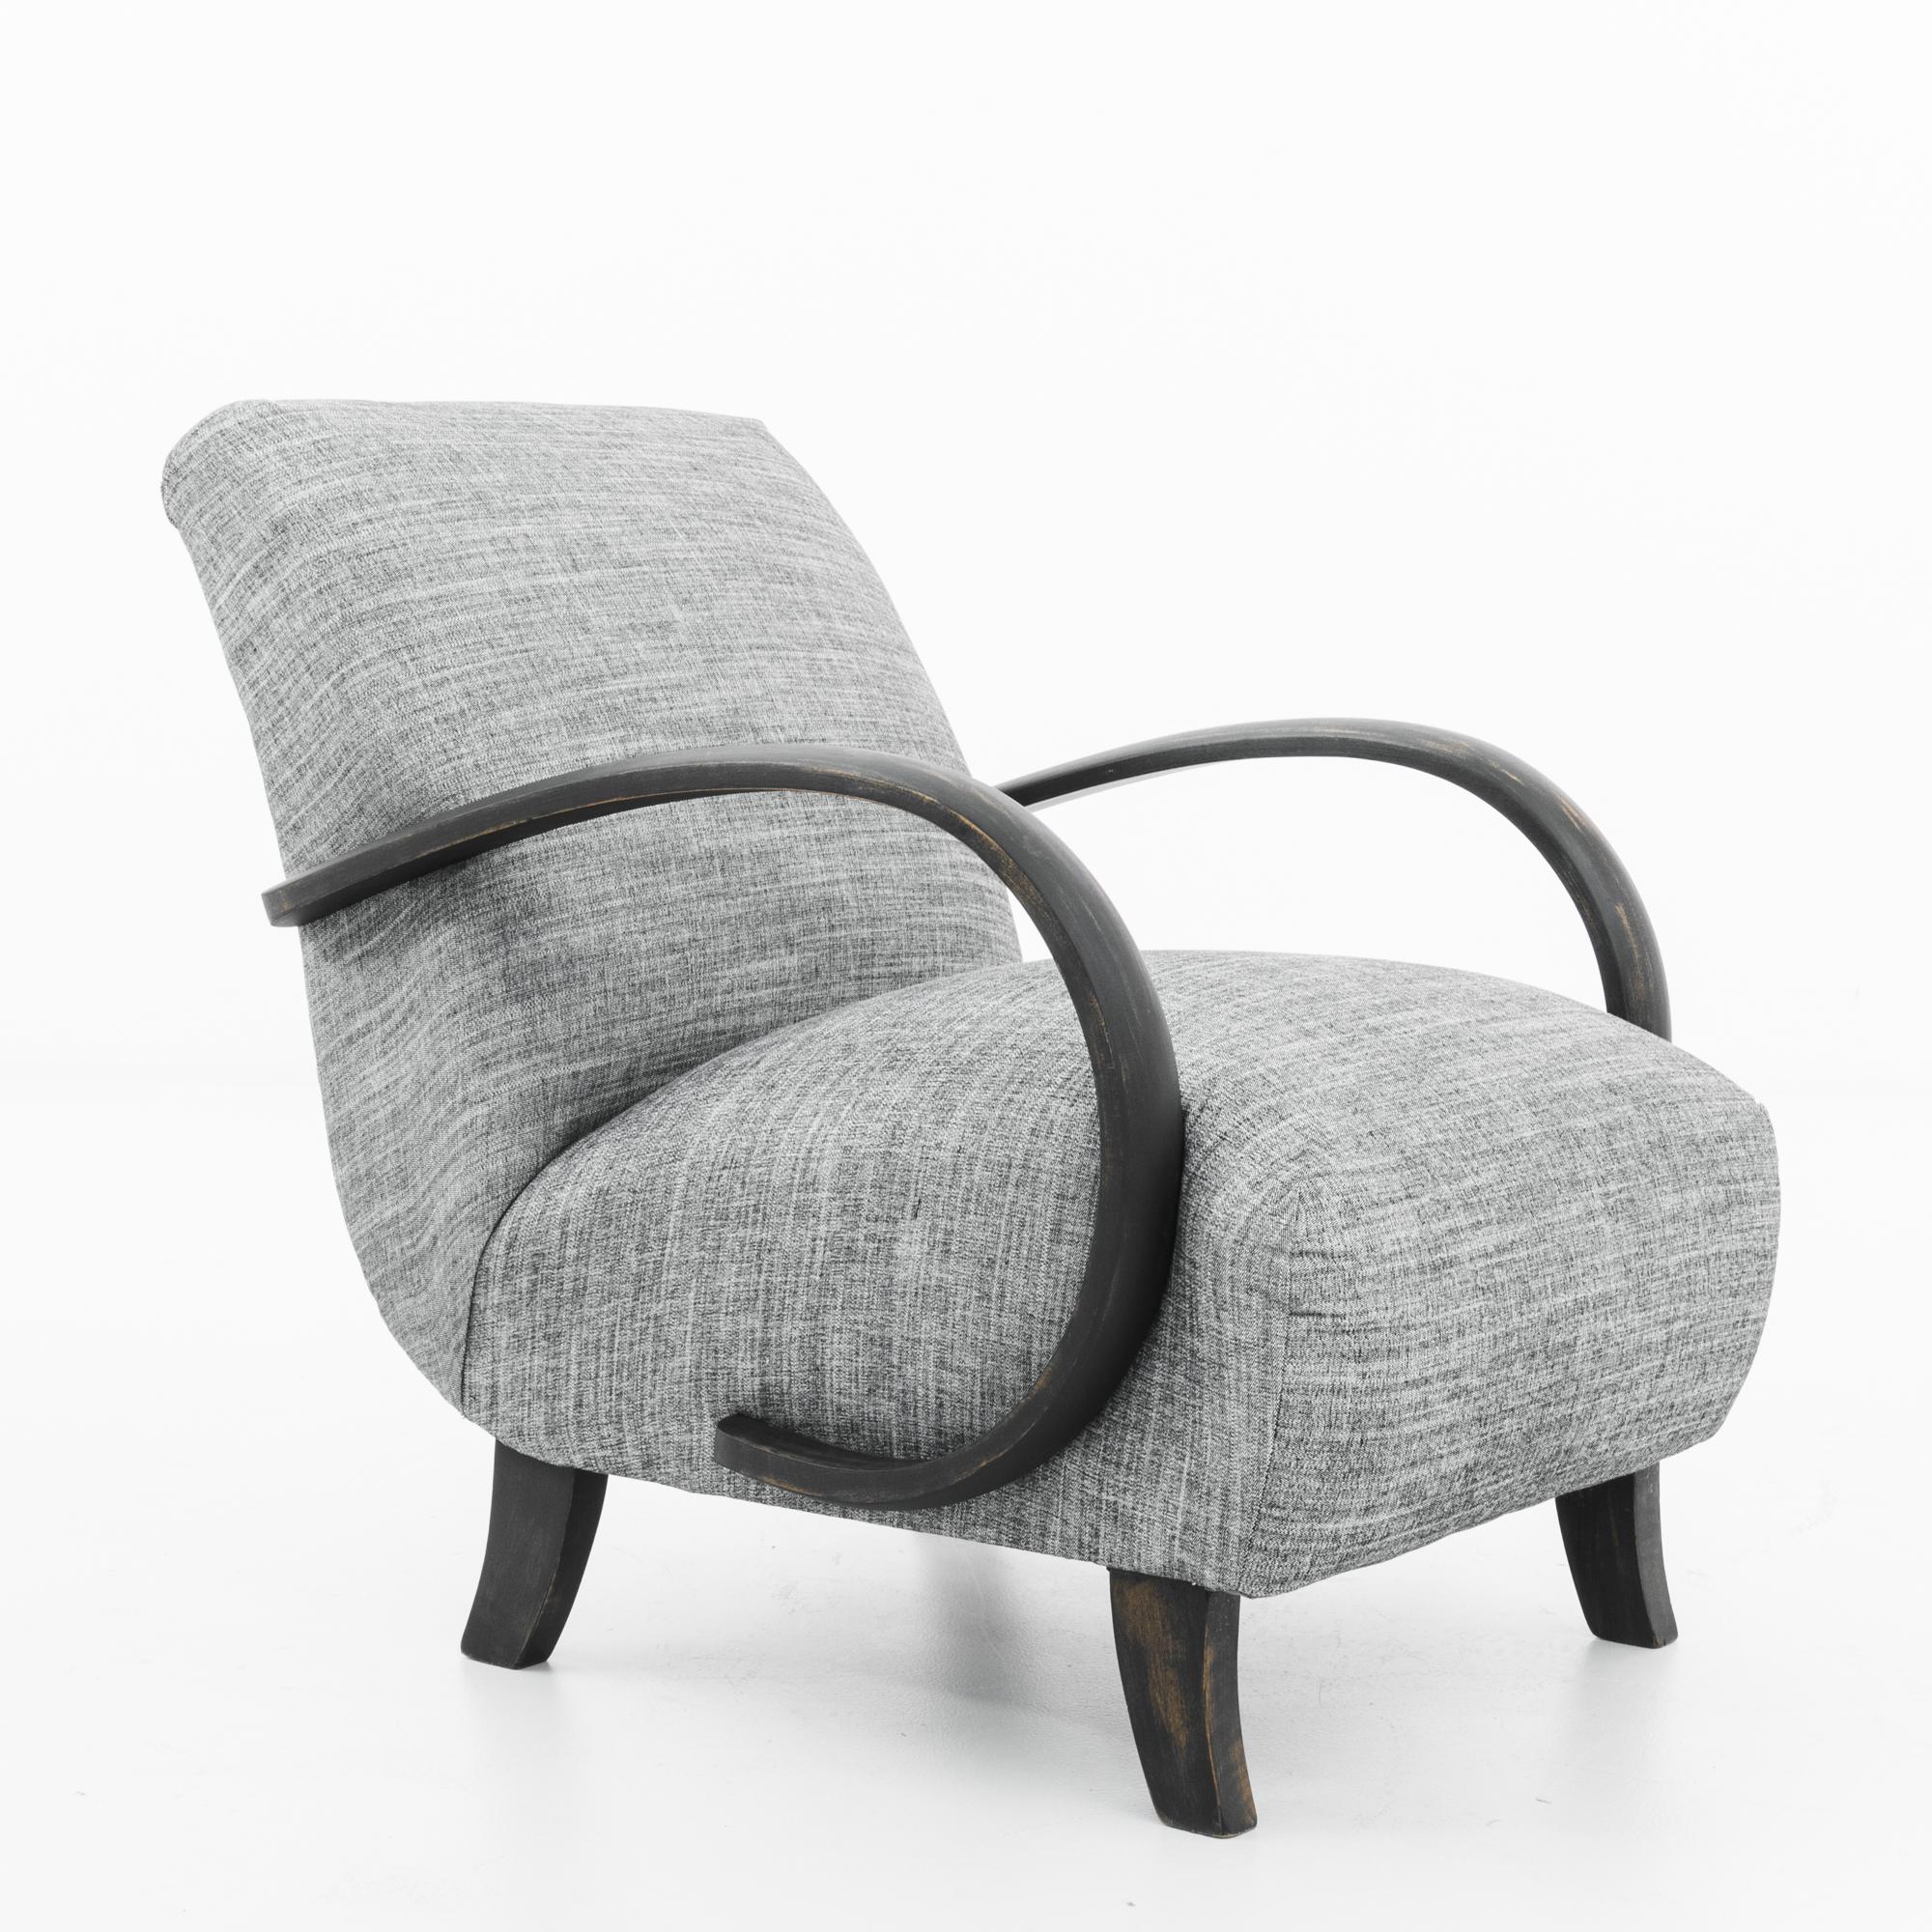 A bentwood upholstered armchair by Czech furniture designer J. Halabala, circa 1960. A Midcentury Modern silhouette, upholstered in grey twill. The cushioned seat is parenthesized by the dramatic swoop of the wooden armrests; the curves of the